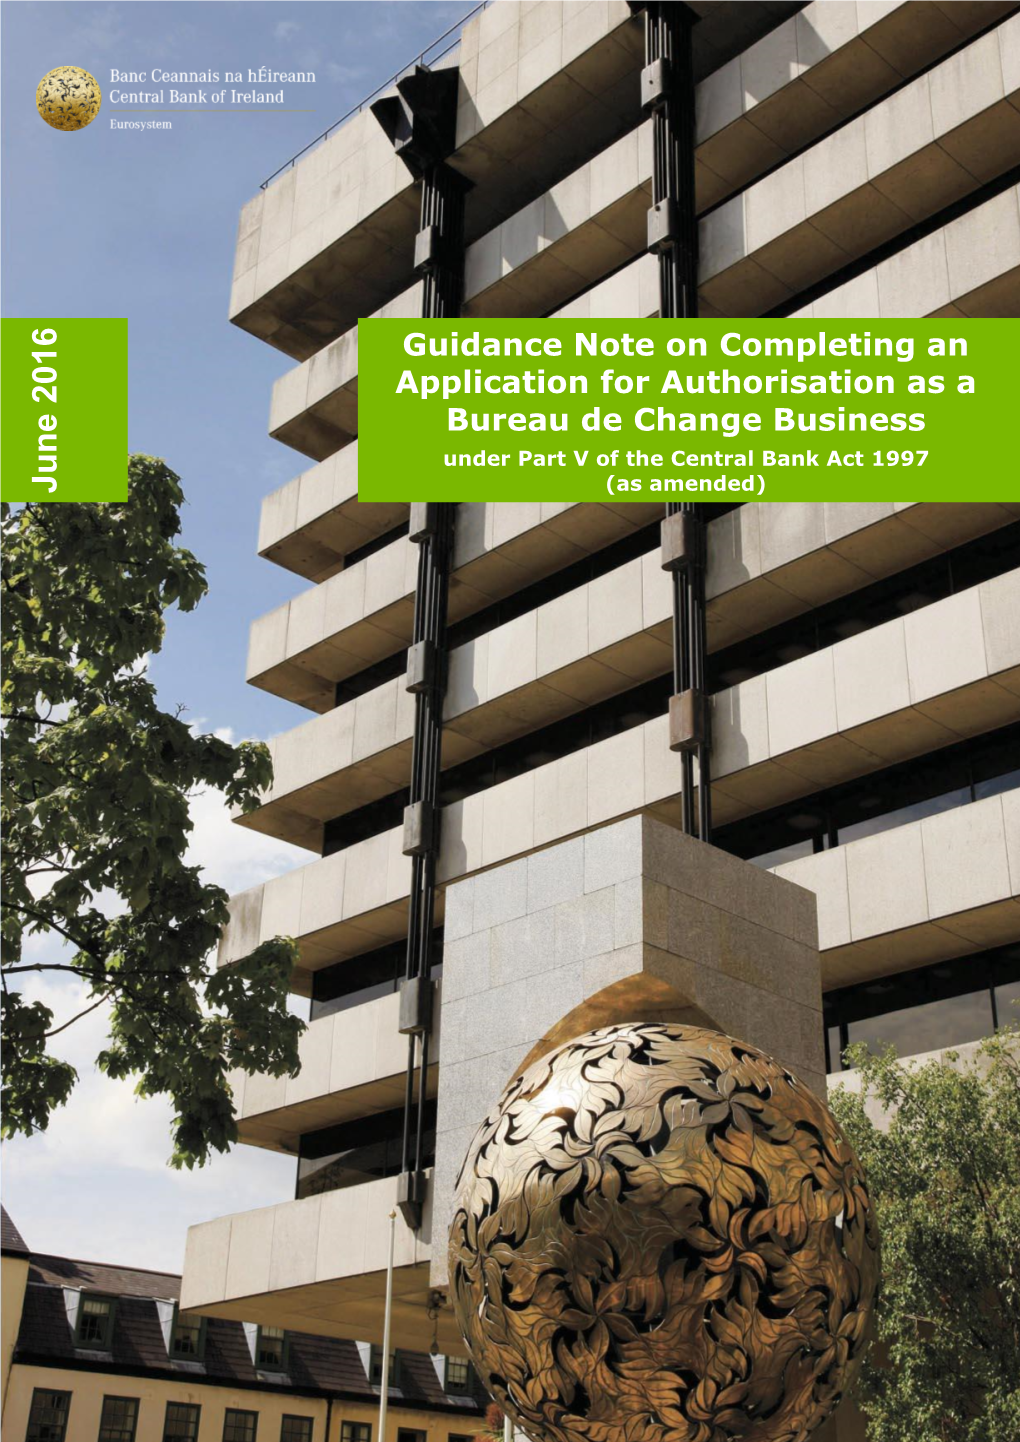 Bureaux De Change Businesses Pursuant to Part V of the Central Bank Act, 1997 (As Amended) (The Act)